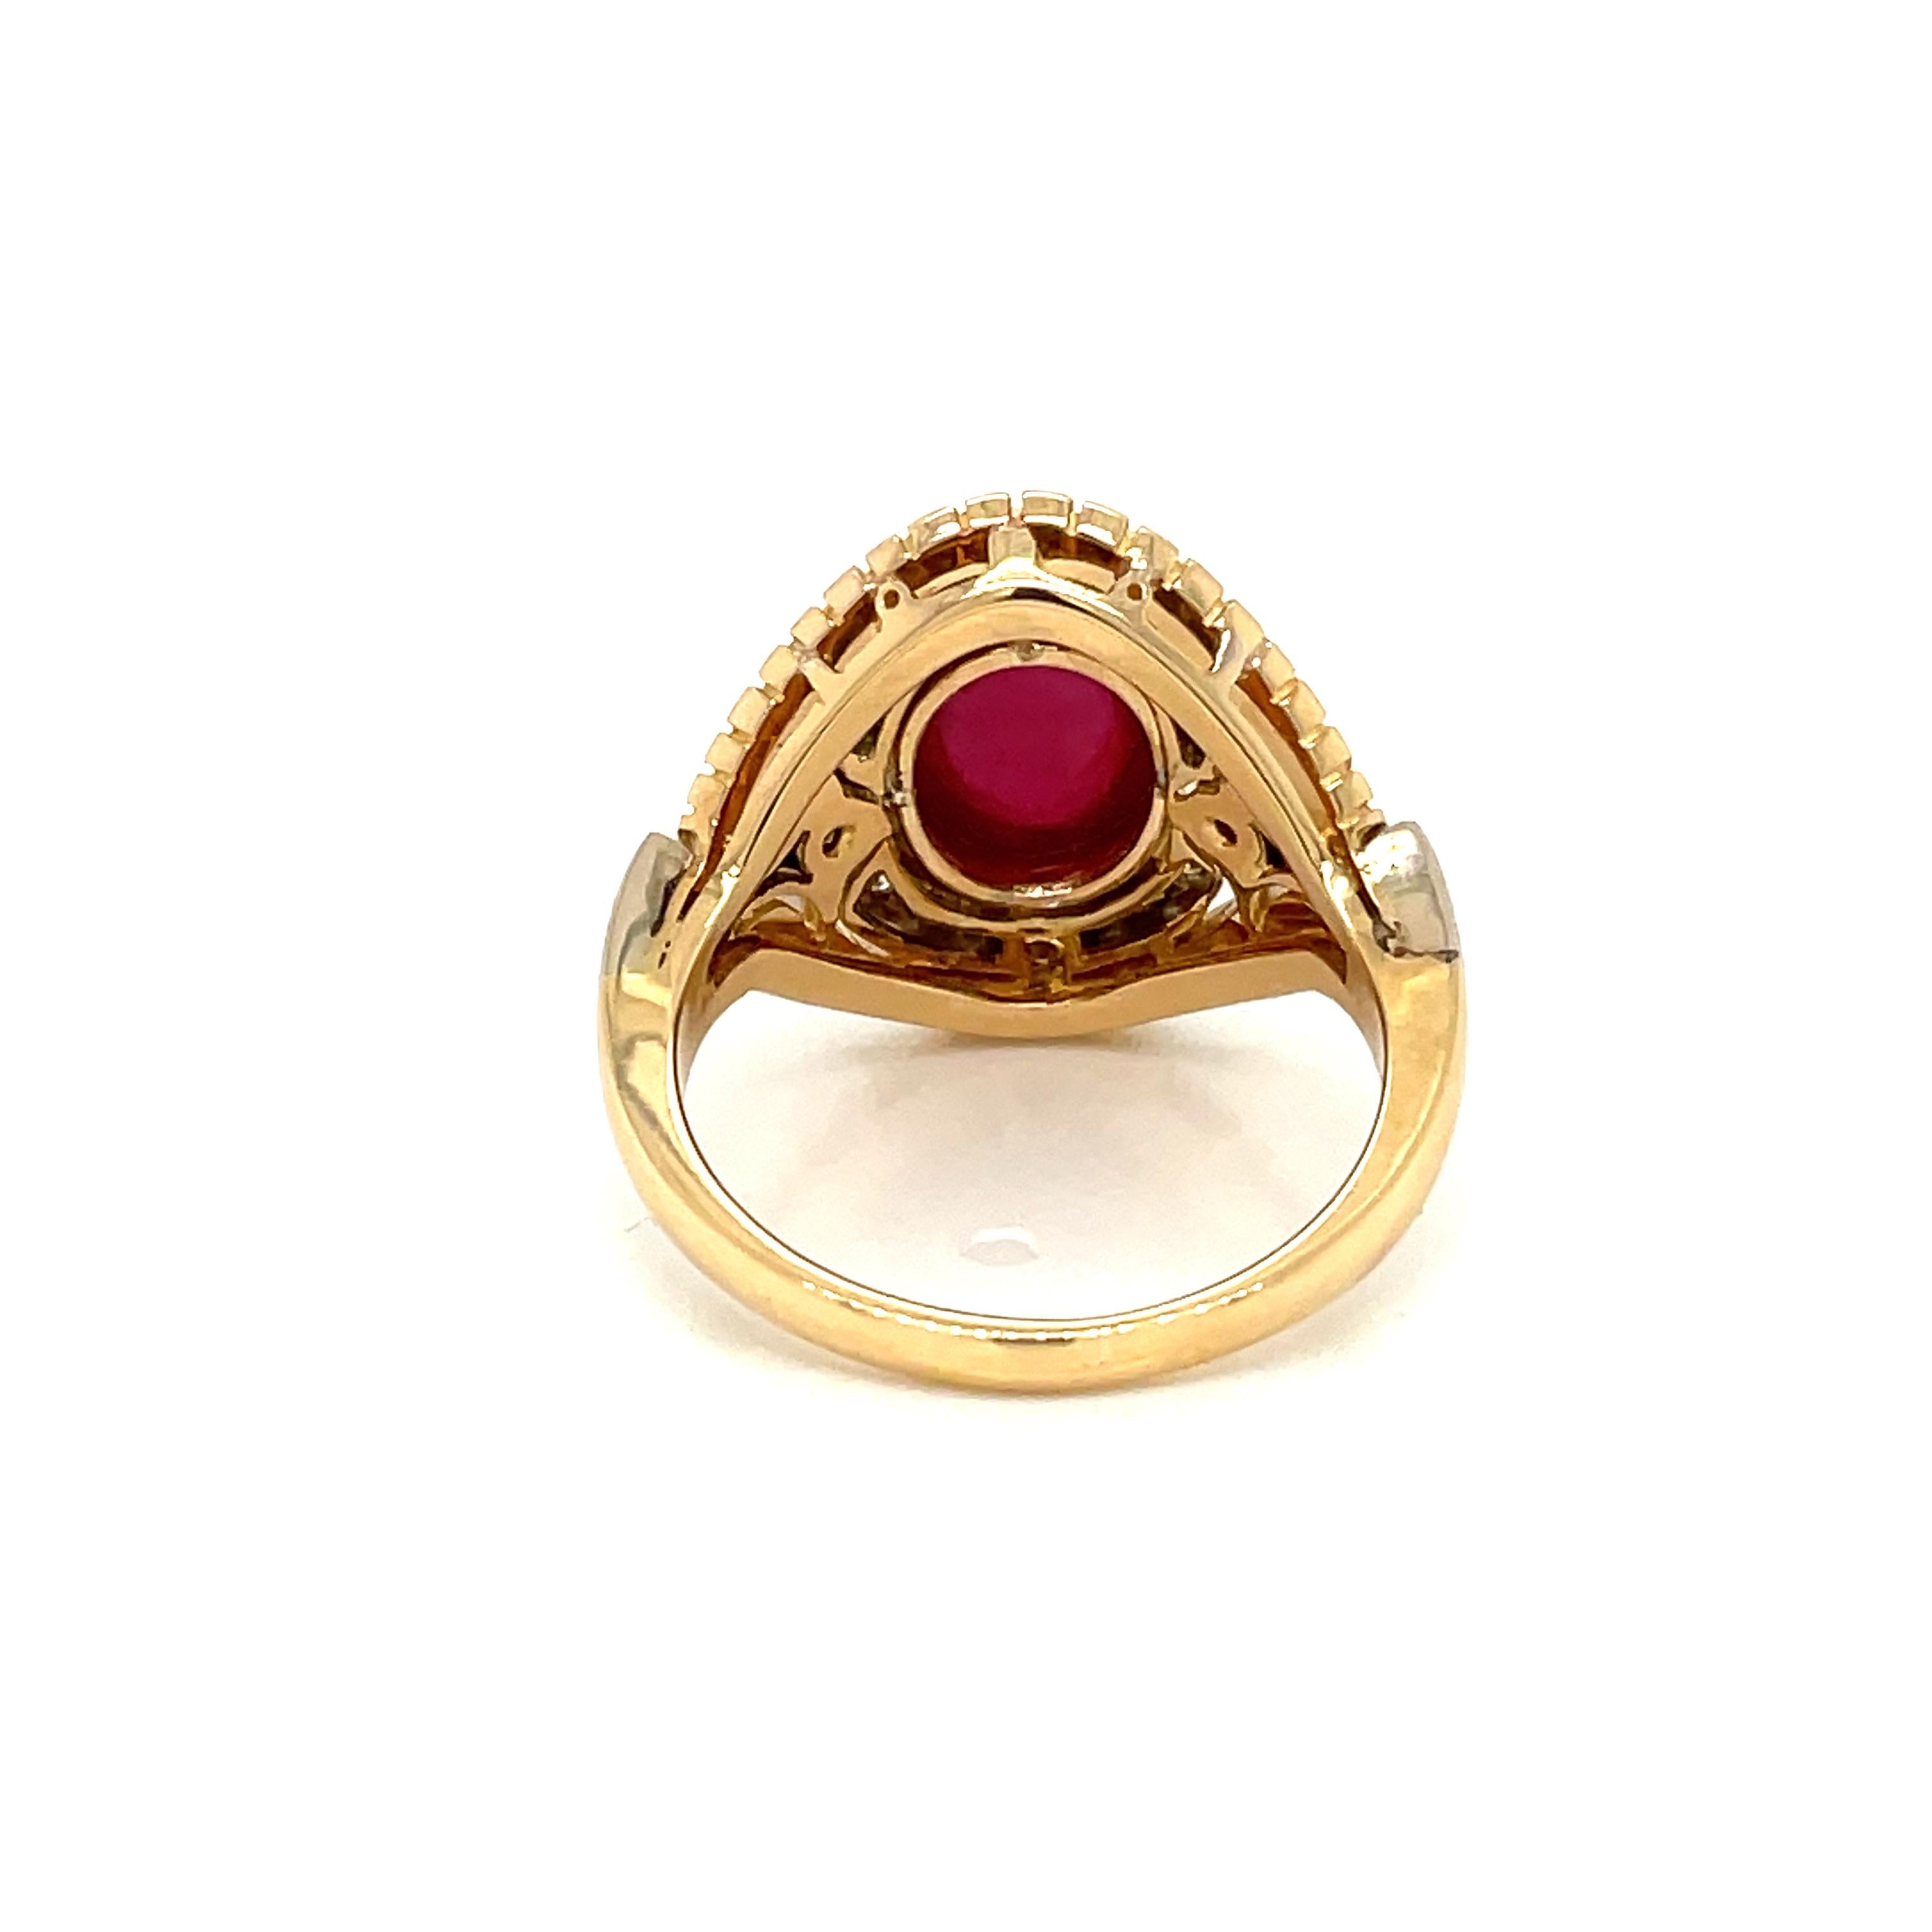 Retro 5 Carat Ruby Diamond Cocktail Ring In Excellent Condition For Sale In Napoli, Italy